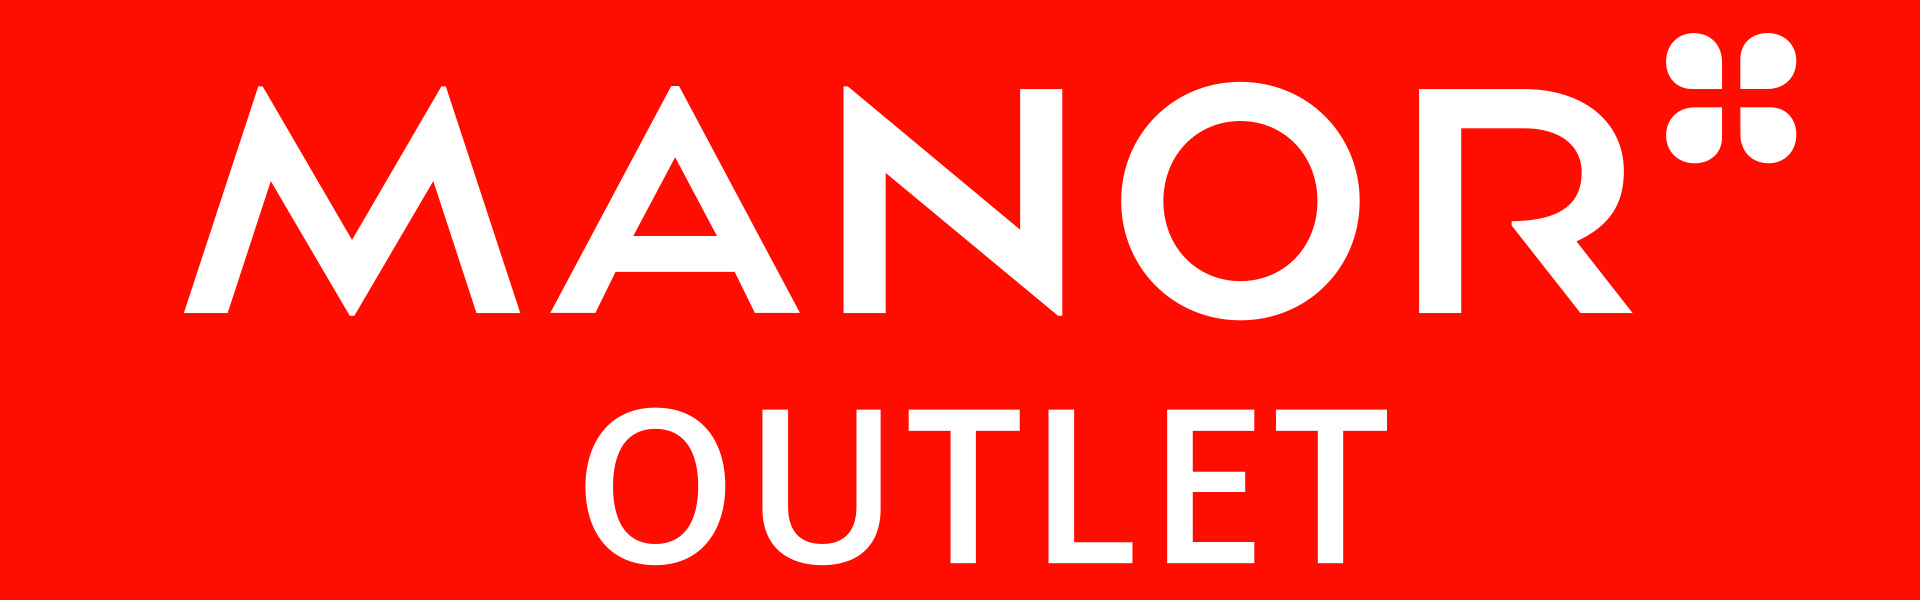 Outlet Manor 